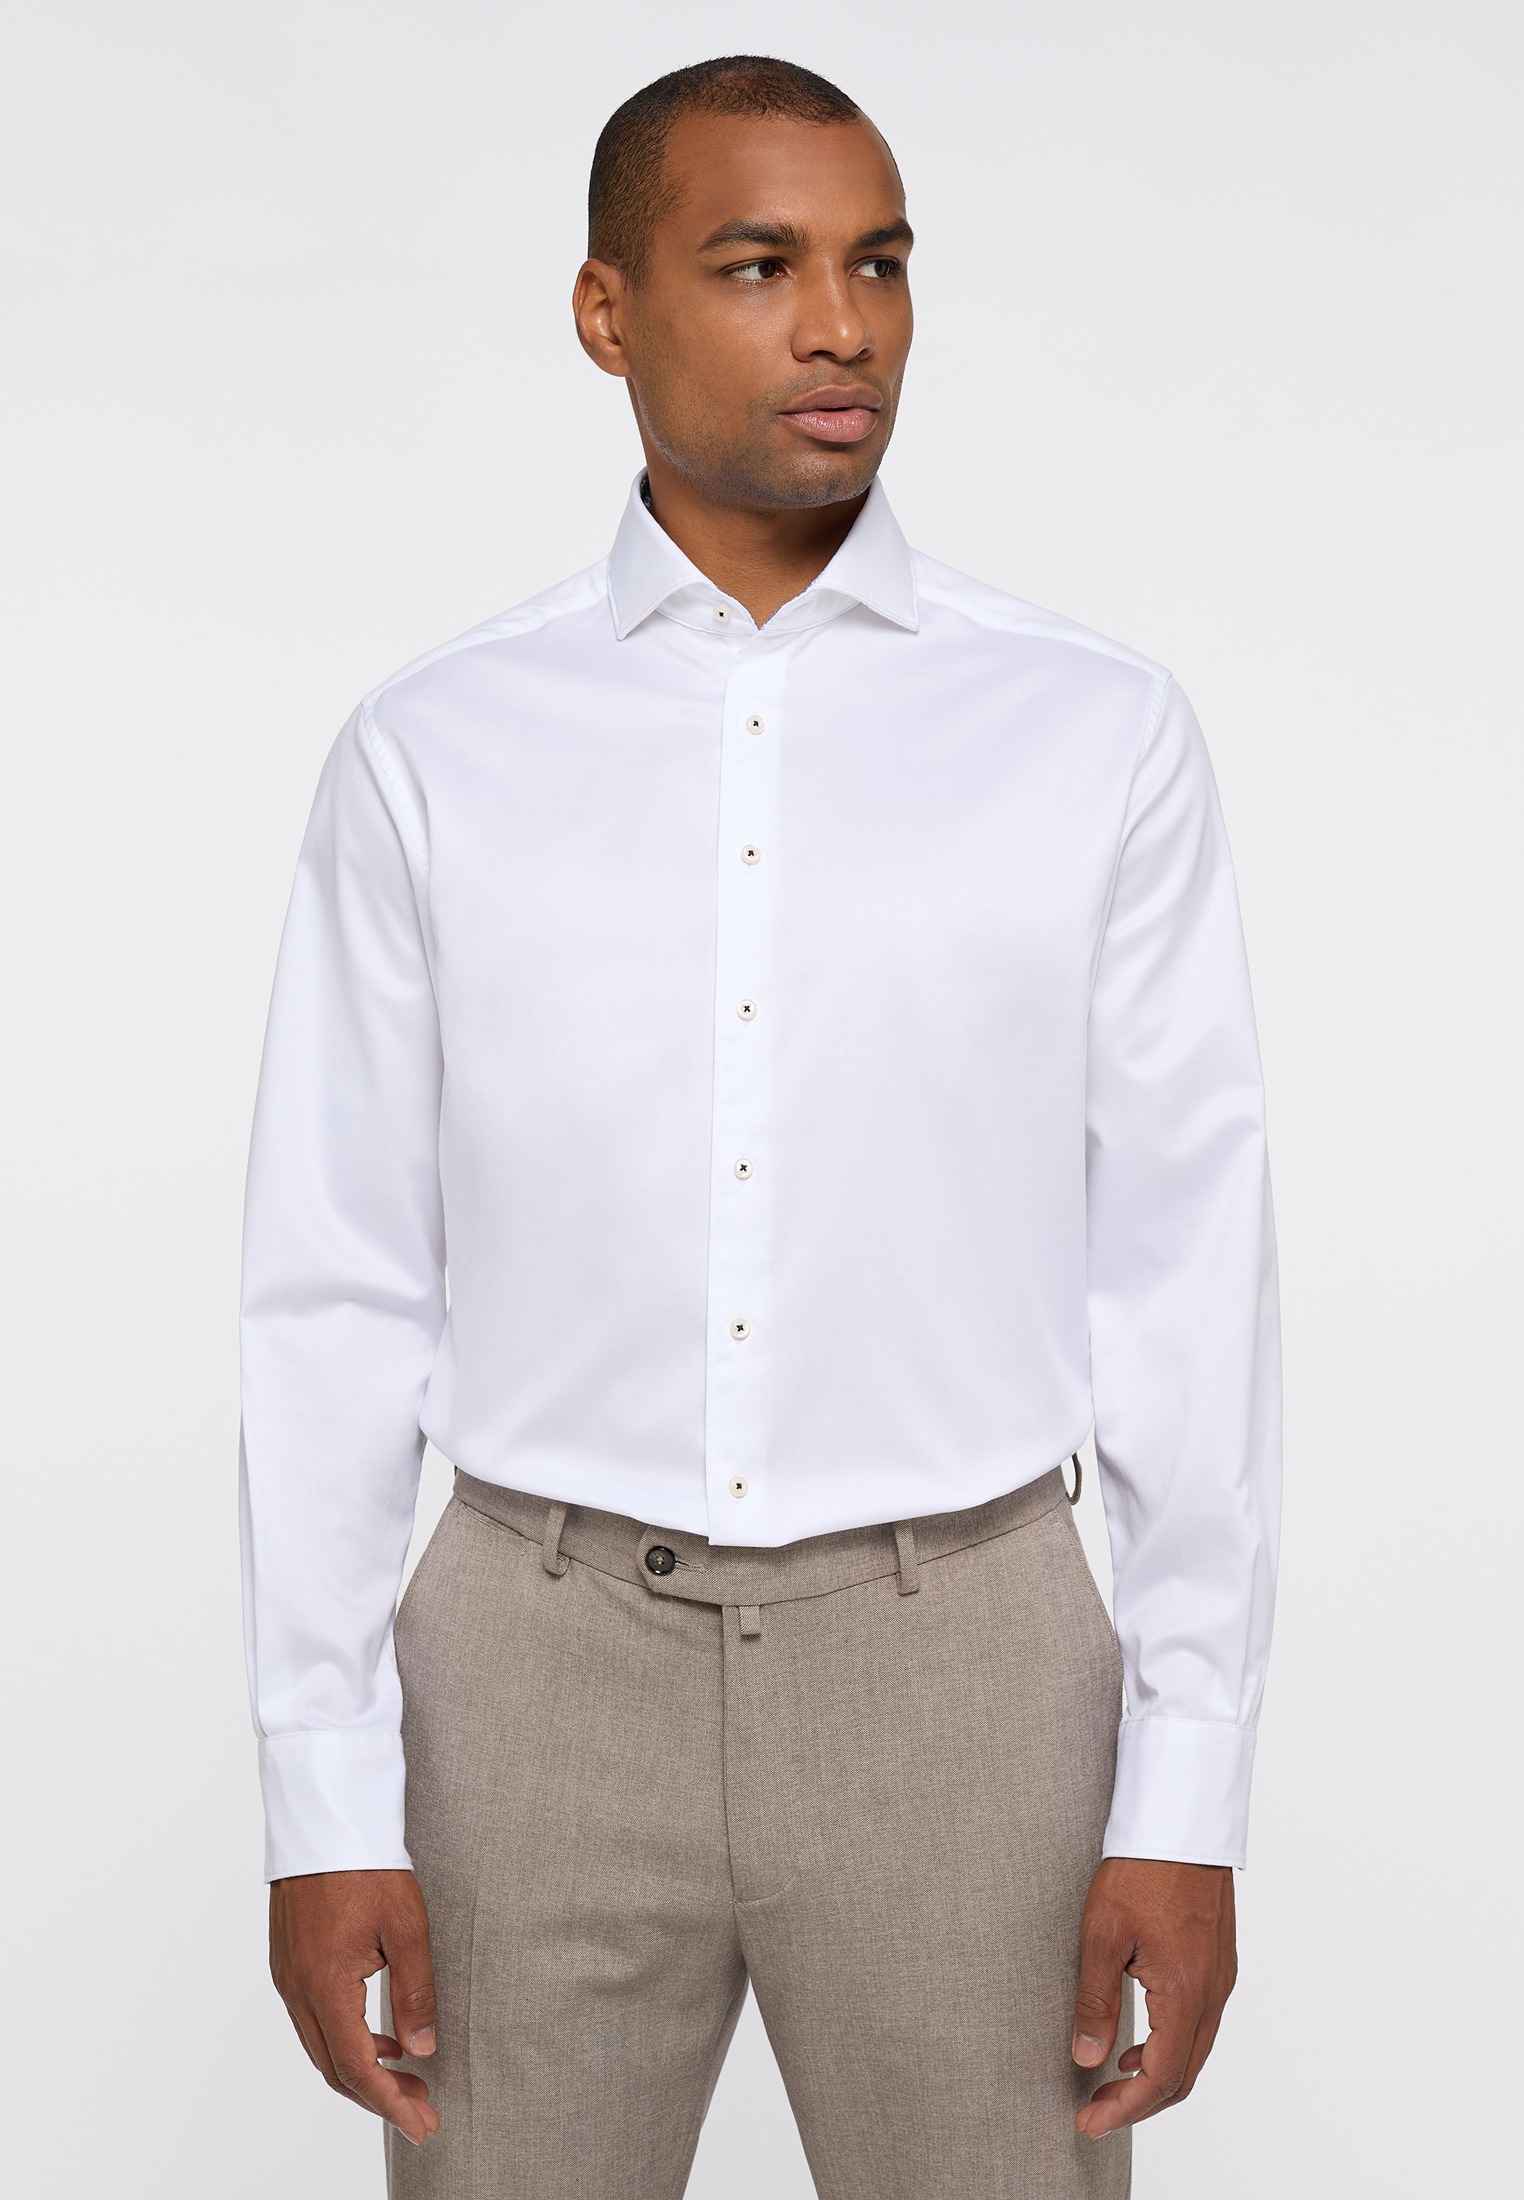 Soft Luxury Shirt • Modern fit, sophisticated detail (3850) - First For Men